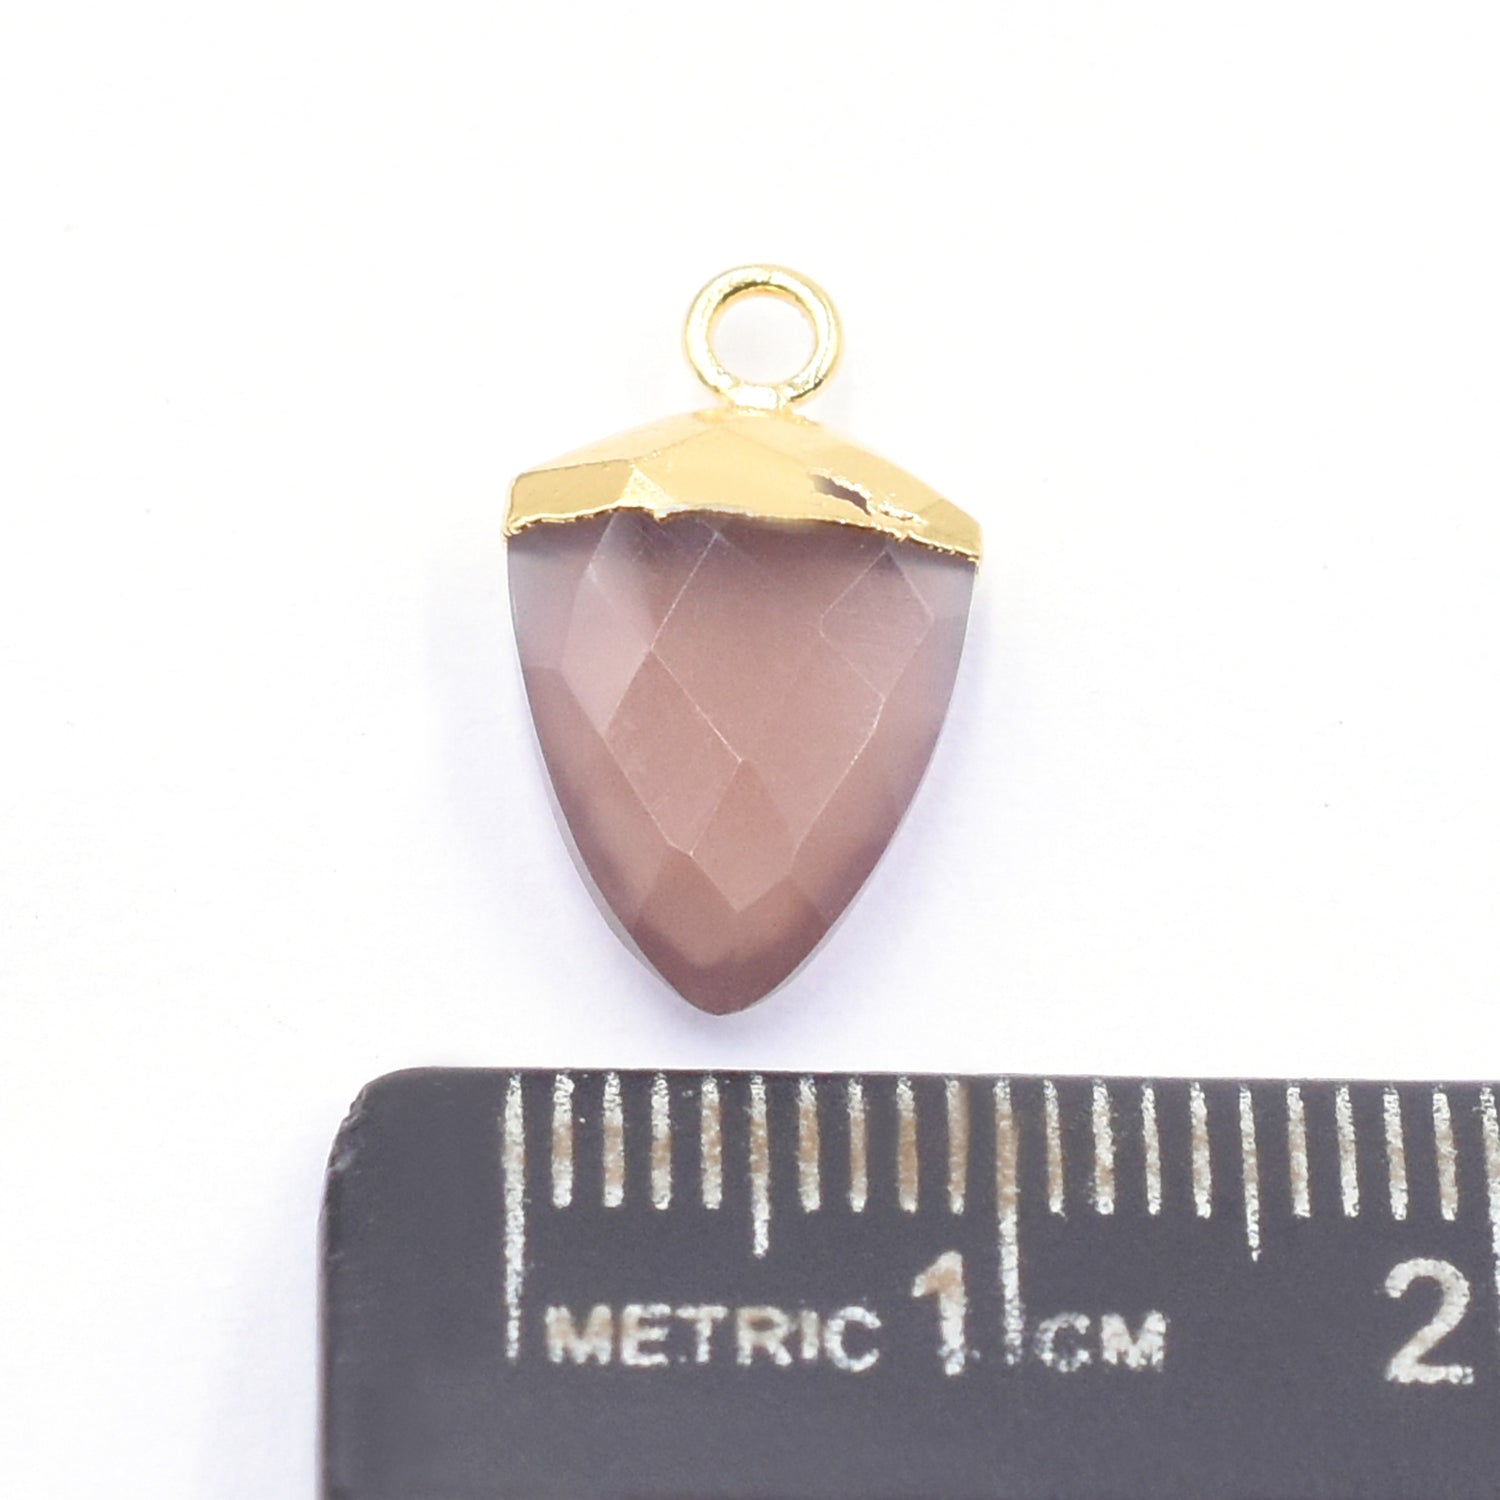 Brown Chocolate Moonstone 13X10 MM Shield Shape Gold Electroplated Pendant ( Set Of 2 Pcs)